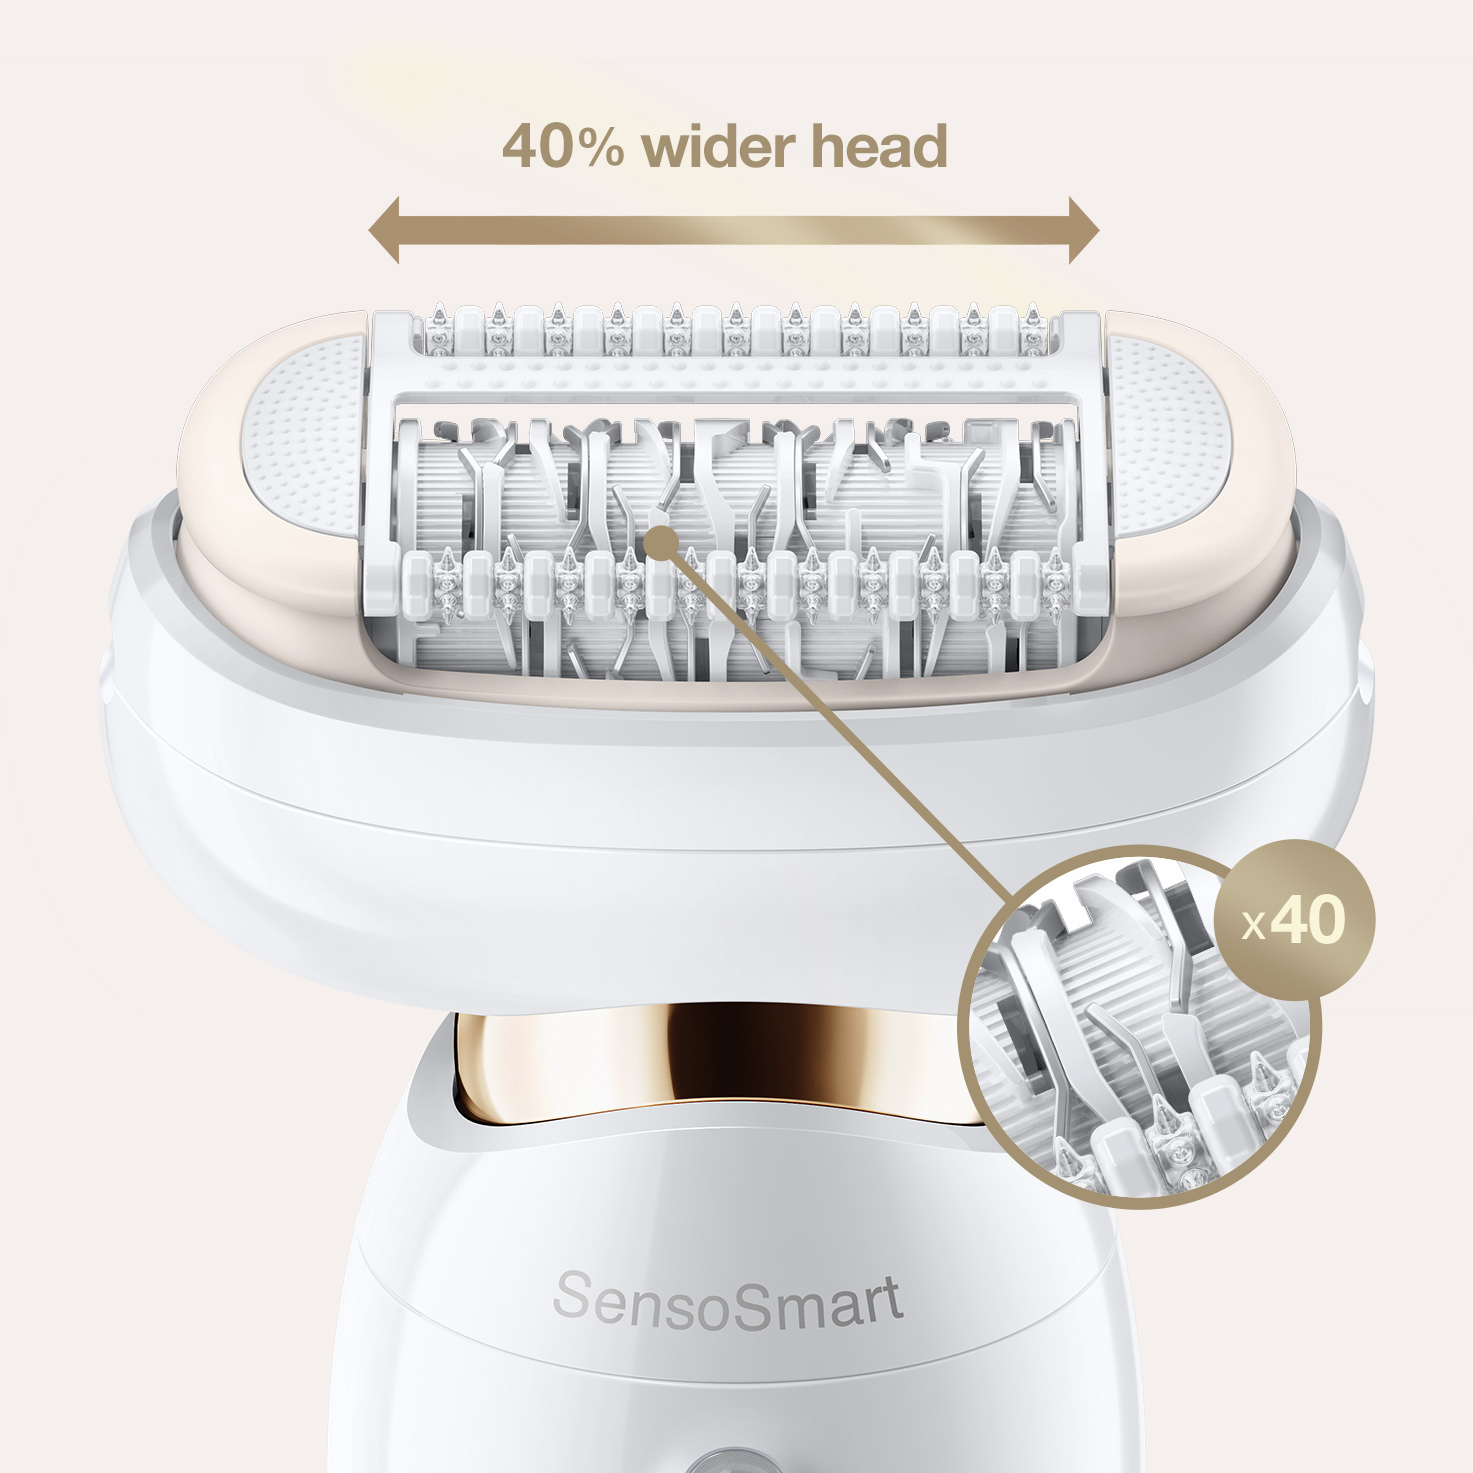 Braun Grip Dry Removal, Head Massage Easier Silk-épil Wet Pressure Better for Control Flex Cordless Effortless for 9 Hair Flexible Hair Skin, Cap Epilator and Anti-Slip for 9020, Removal, & with Epilation,